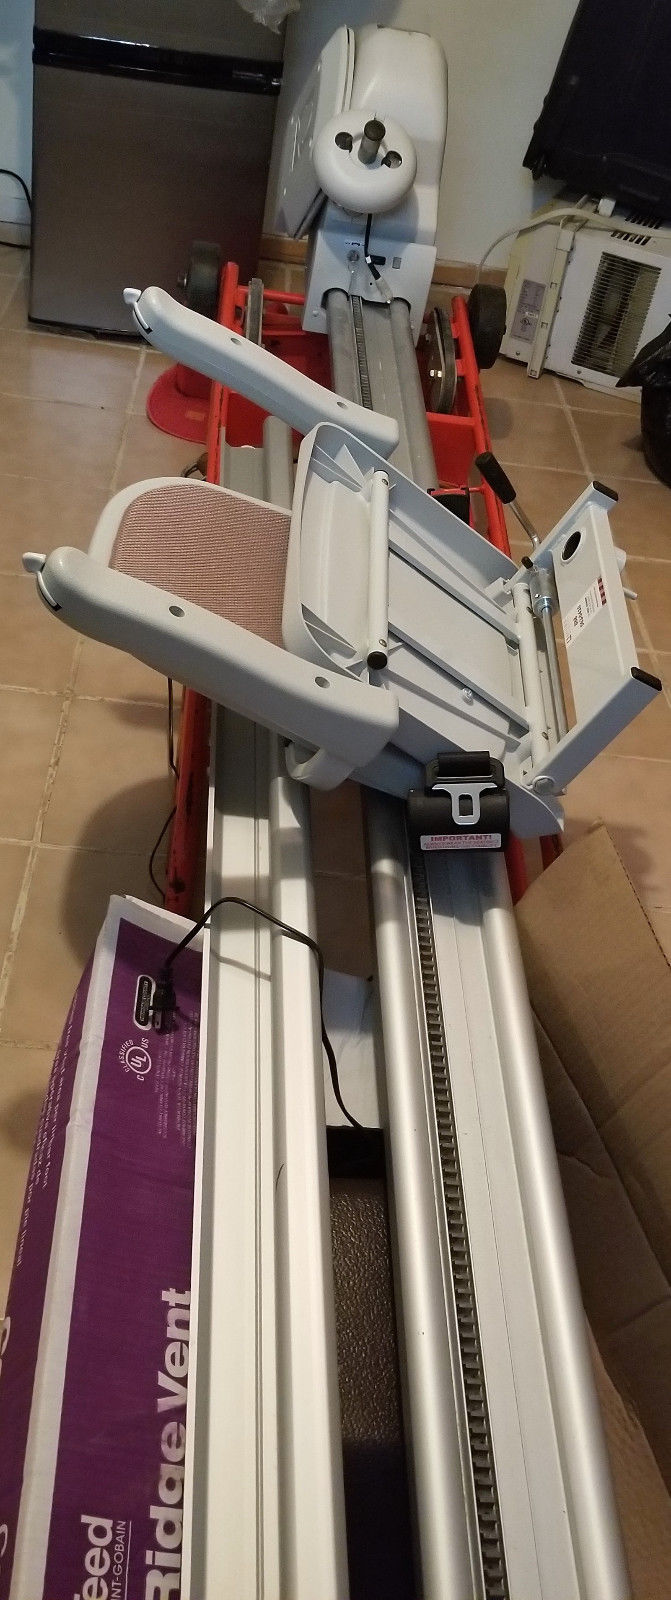 Acorn Superglide 120 Stairlift